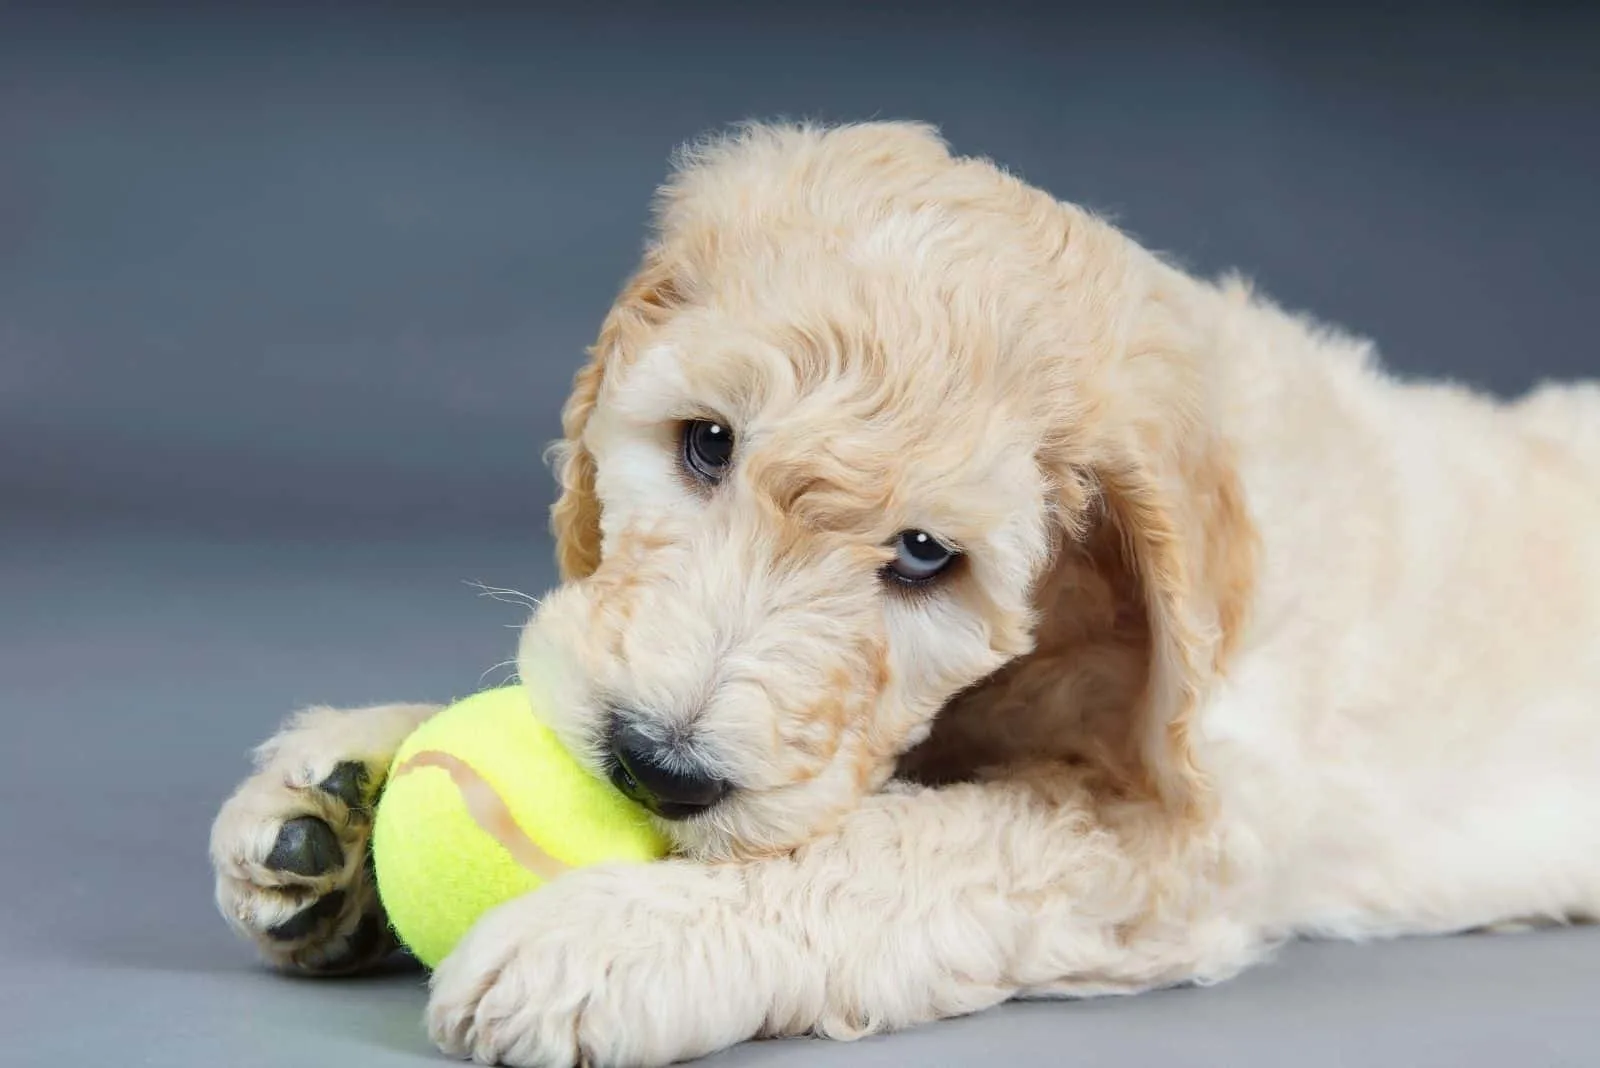 cute goldendoodle playing and biting the green ball